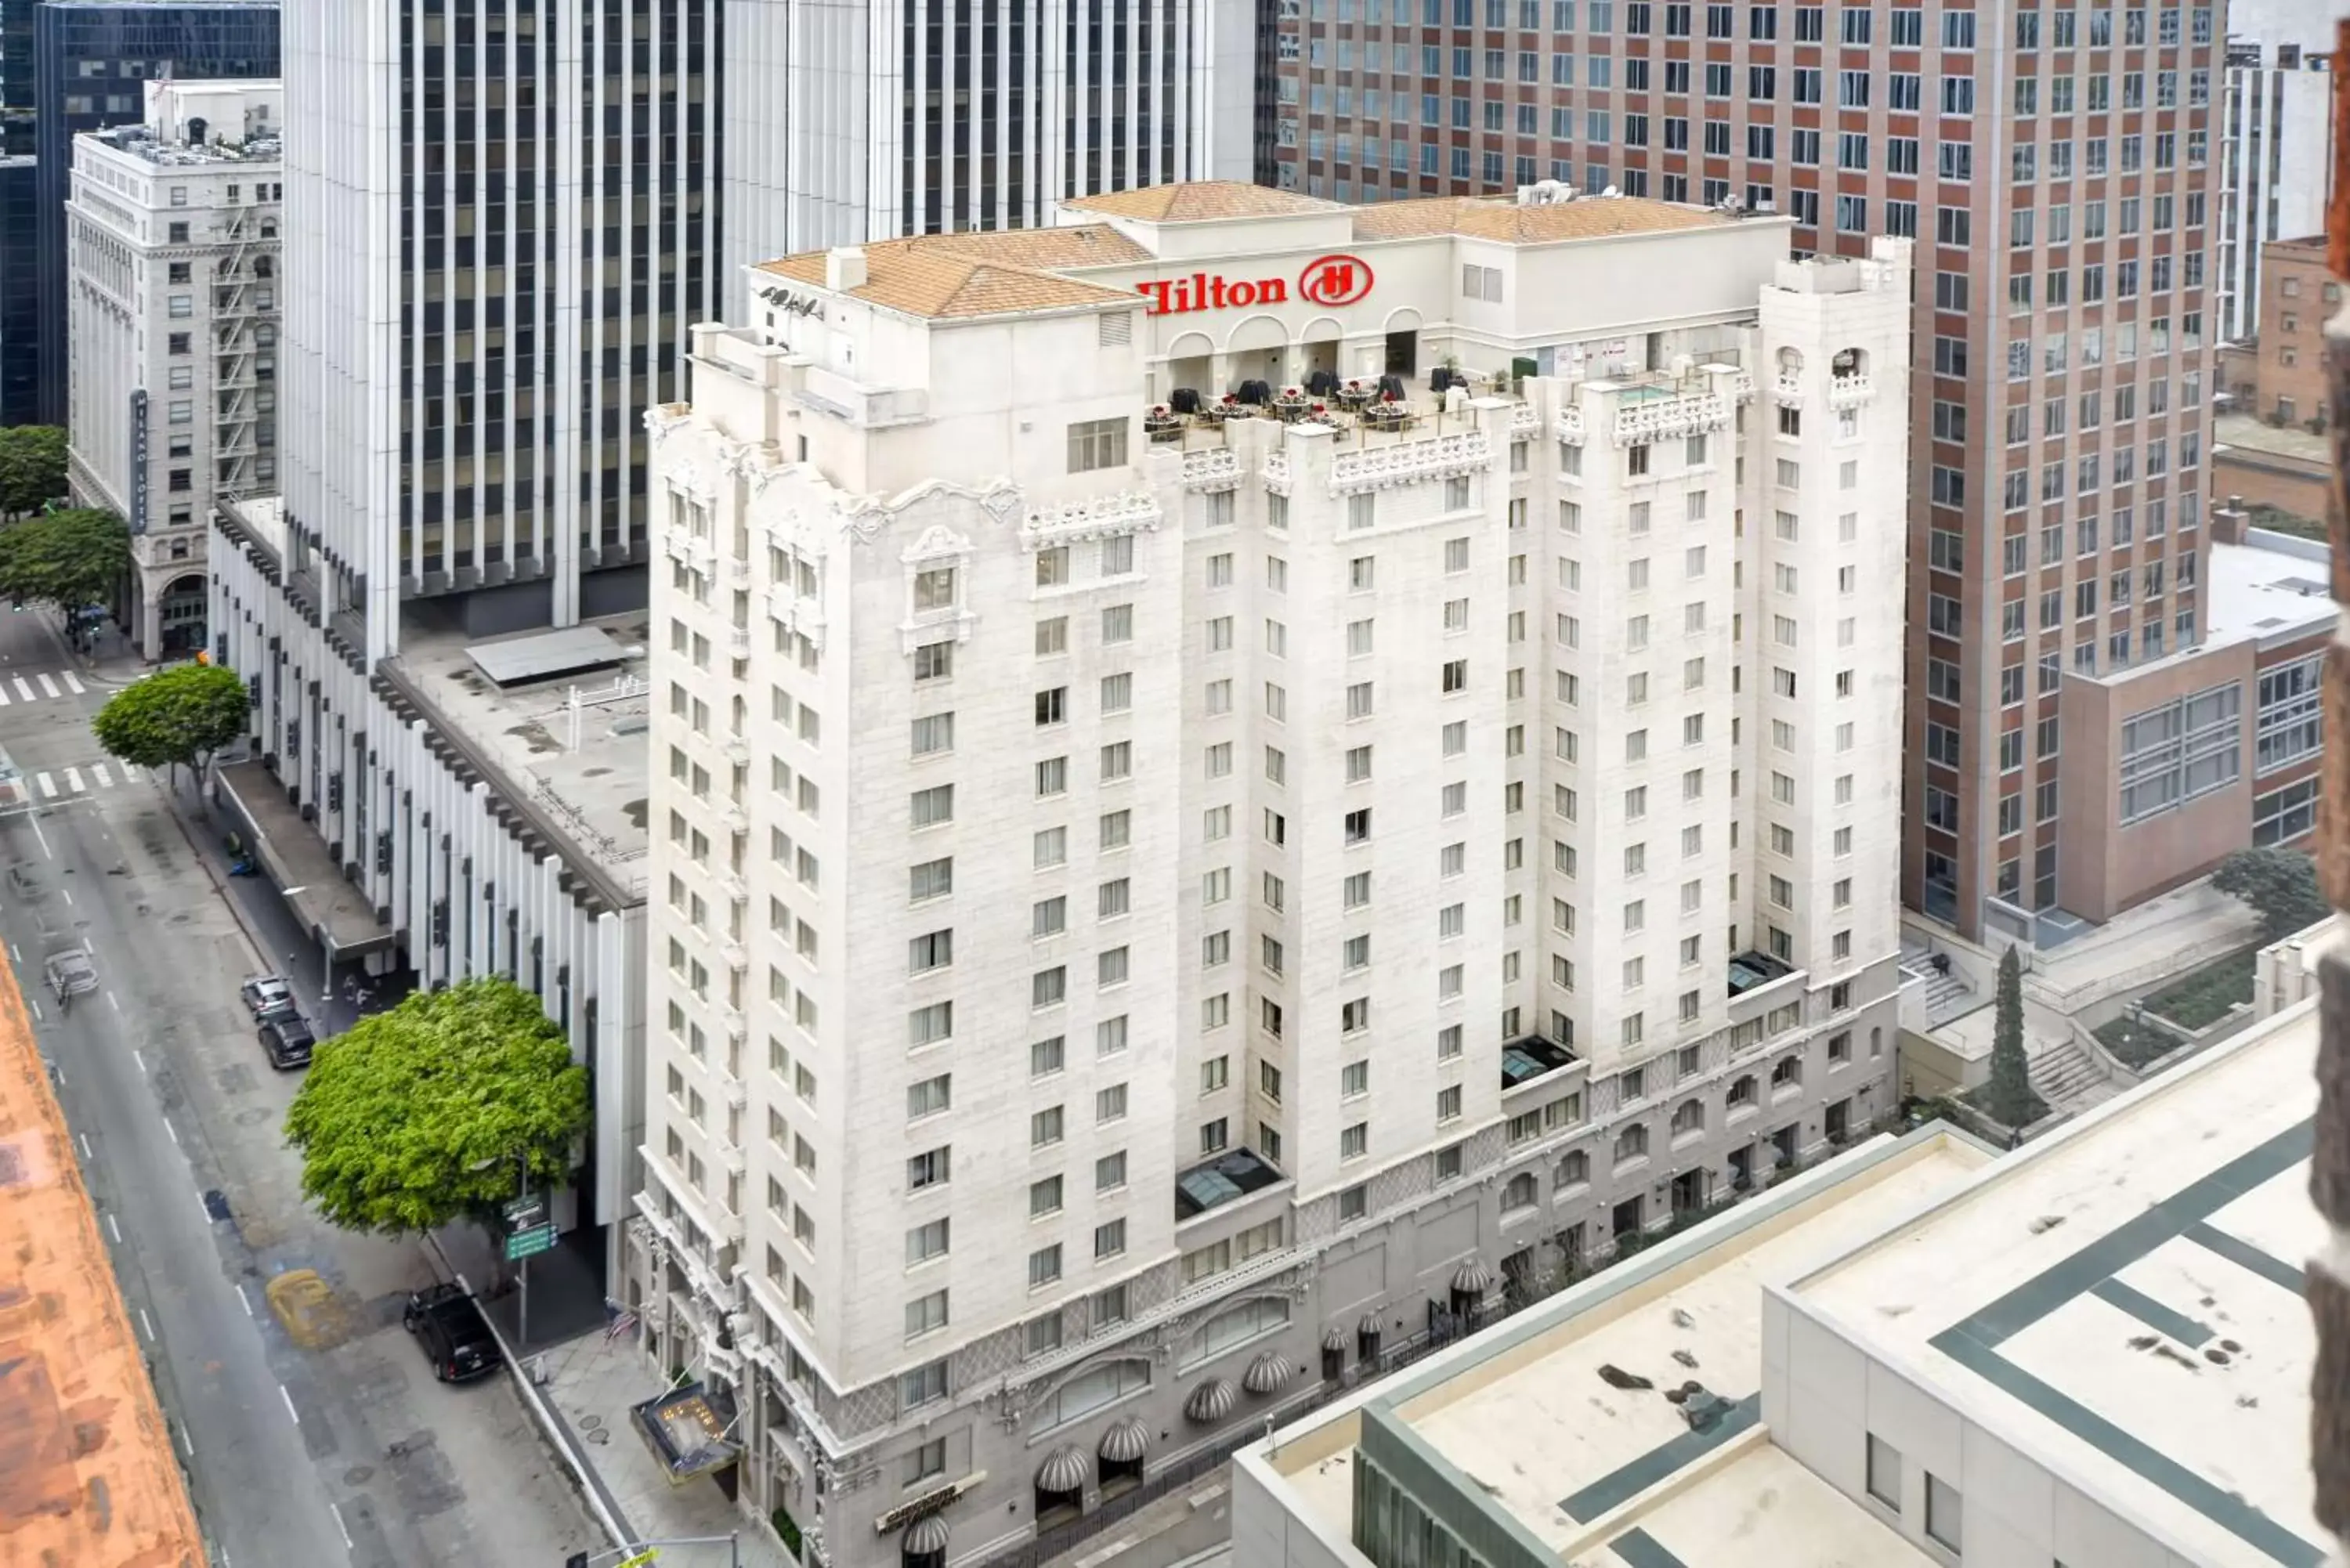 Property building in Hilton Checkers Los Angeles